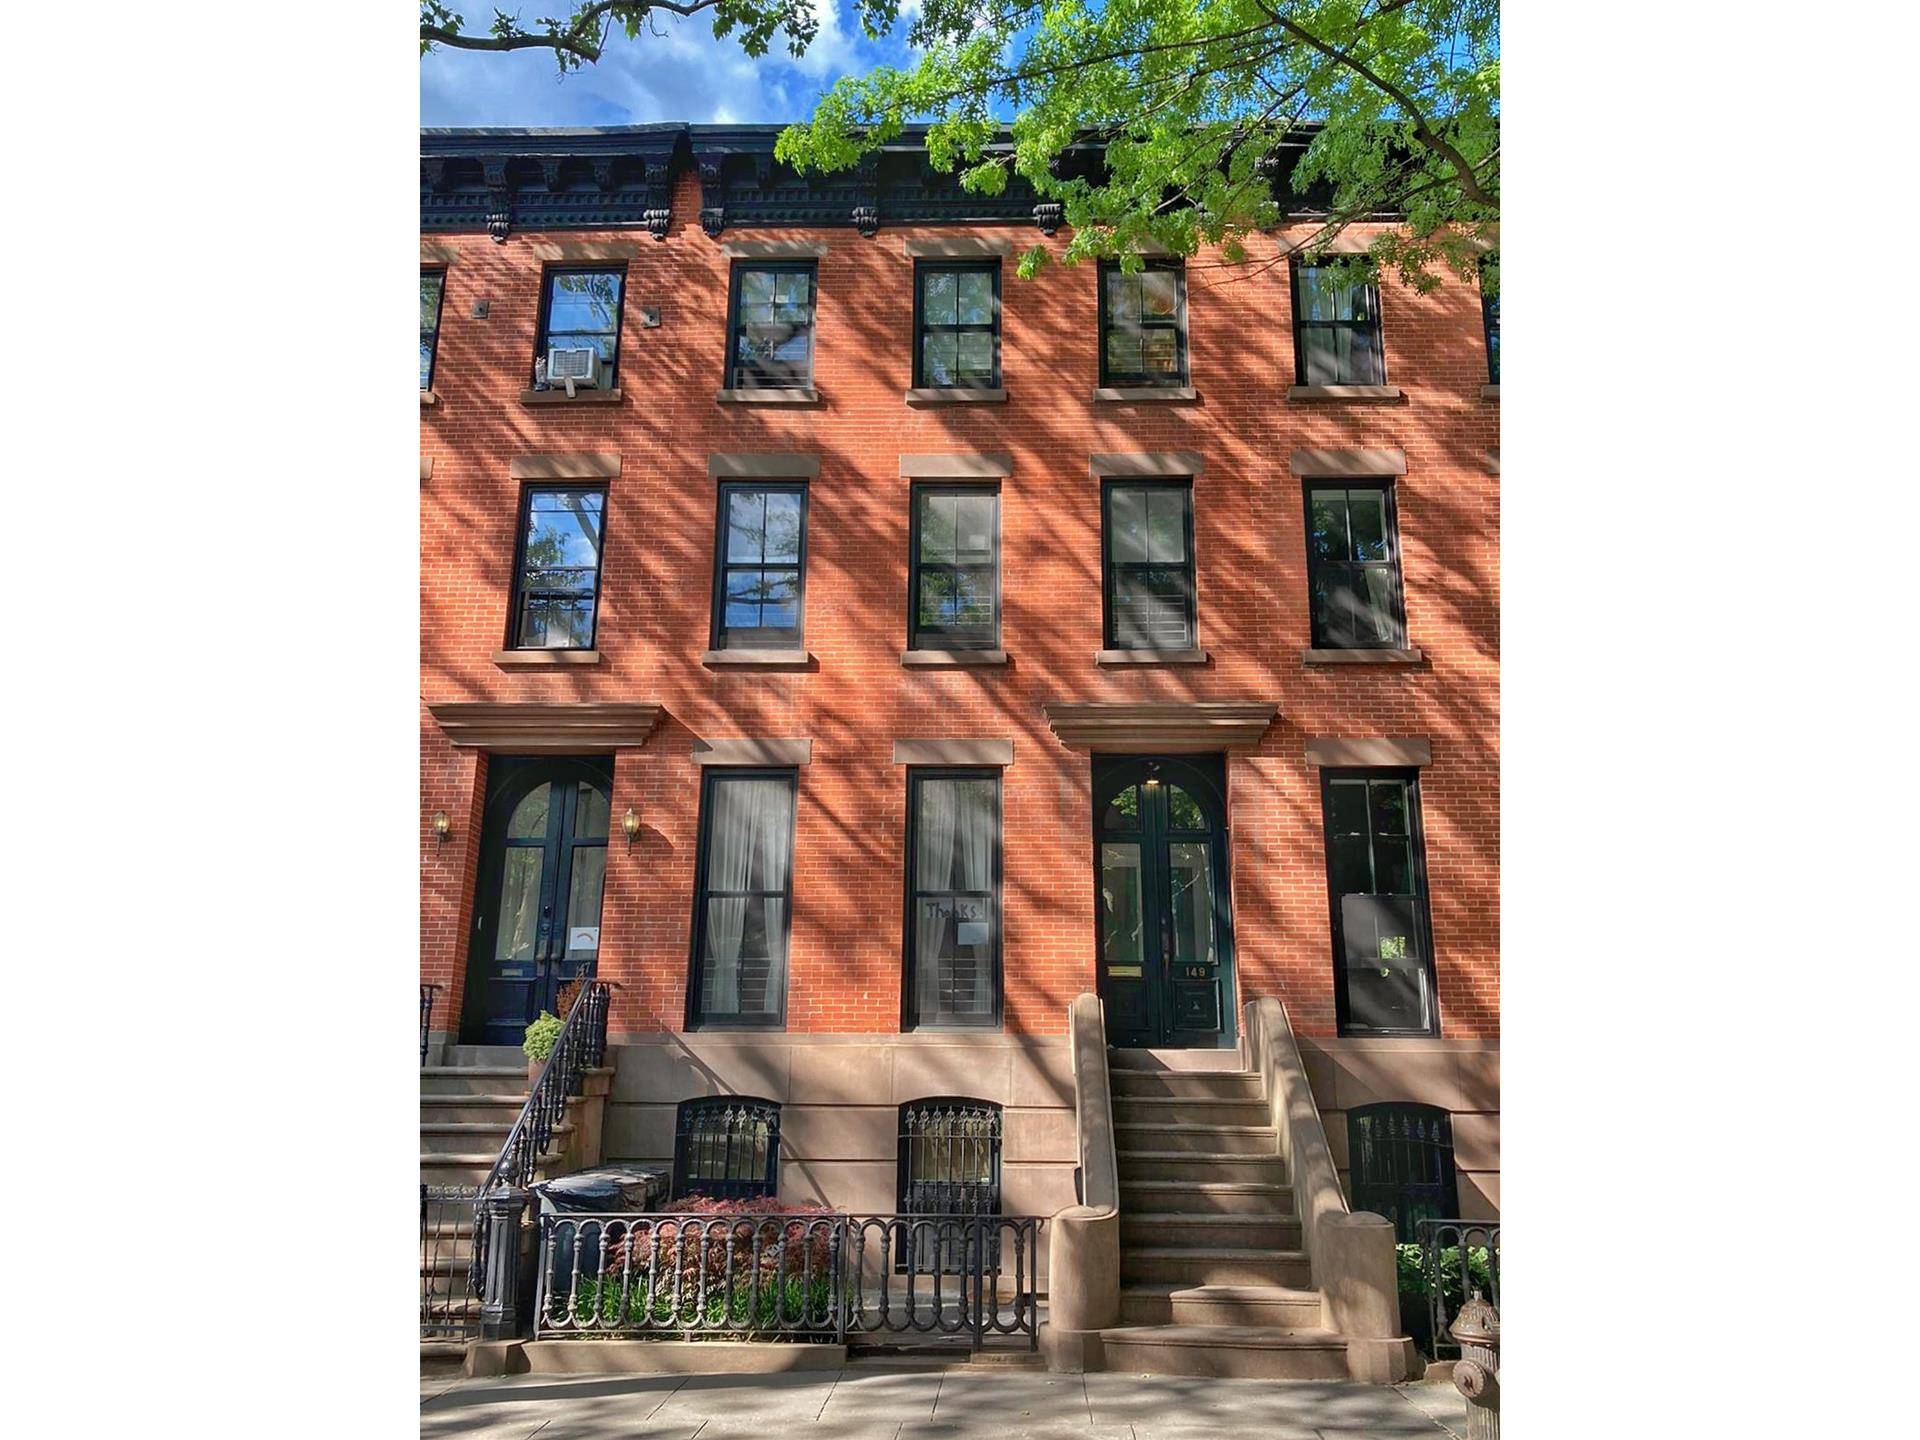 This beautifully designed and finished Garden duplex located in a 1890's townhouse is in the heart of Historic Boerum Hill, and has lots of room to spread out.